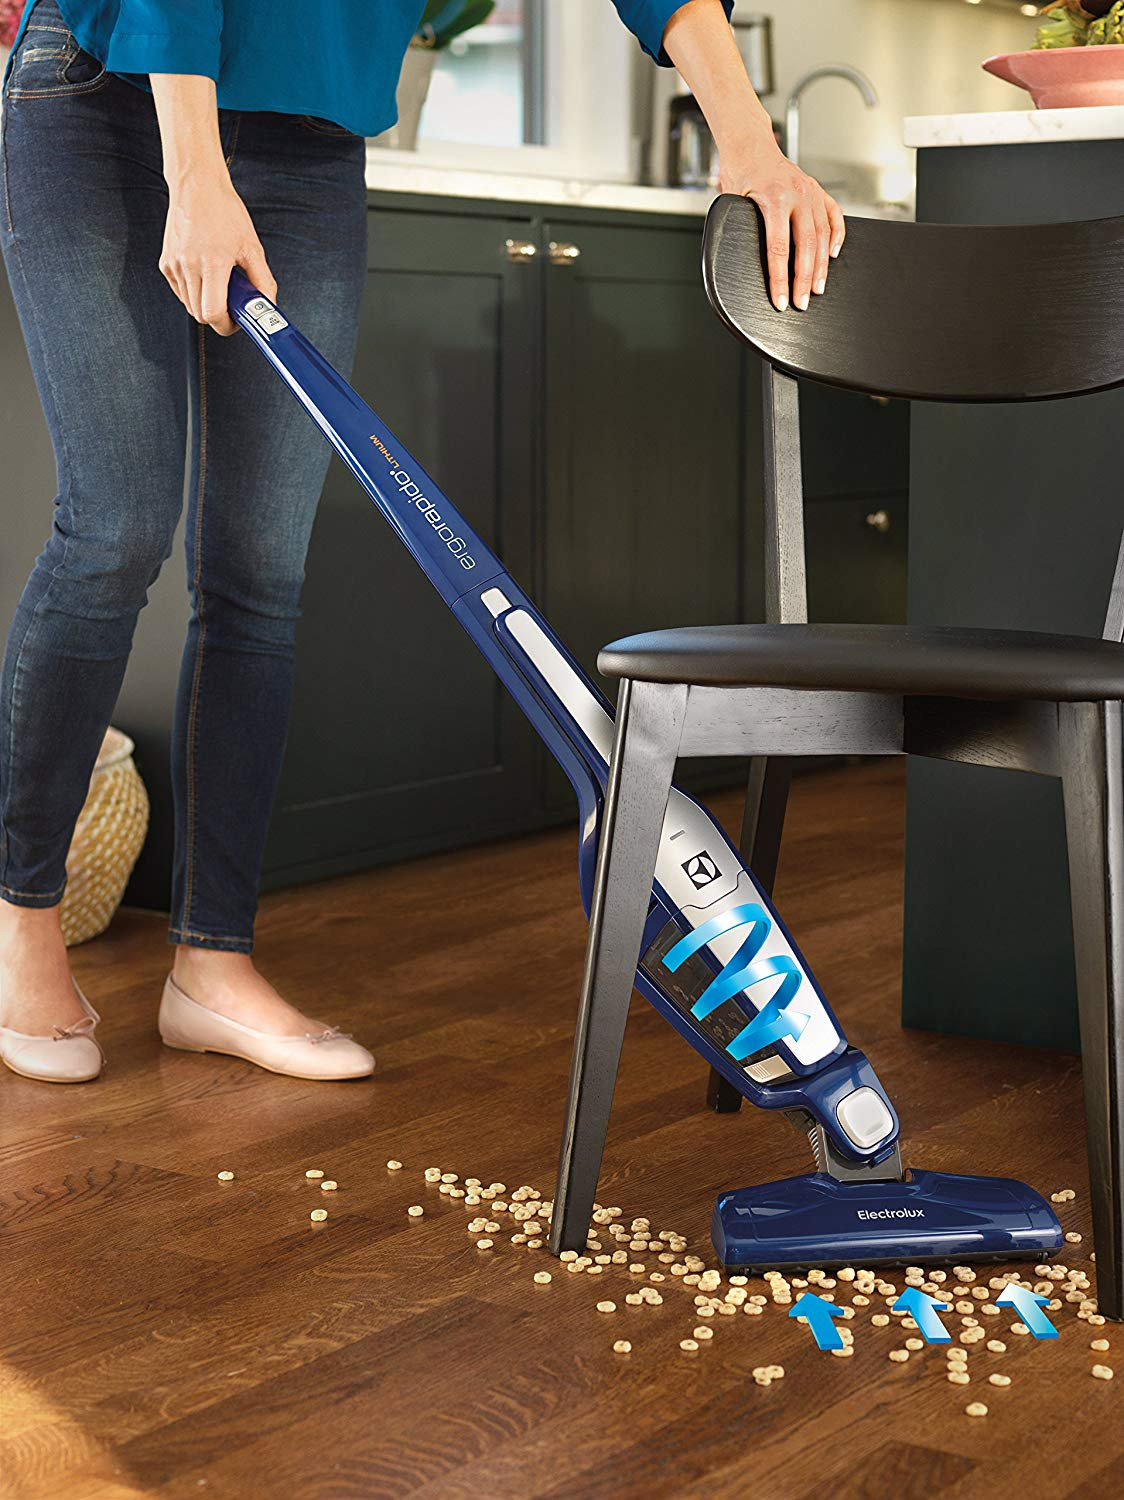 16 Recommended Best Vacuums for Hardwood Floors 2016 2024 free download best vacuums for hardwood floors 2016 of amazon com electrolux ergorapido lithium ion 2 1 stick and handheld pertaining to amazon com electrolux ergorapido lithium ion 2 1 stick and handheld